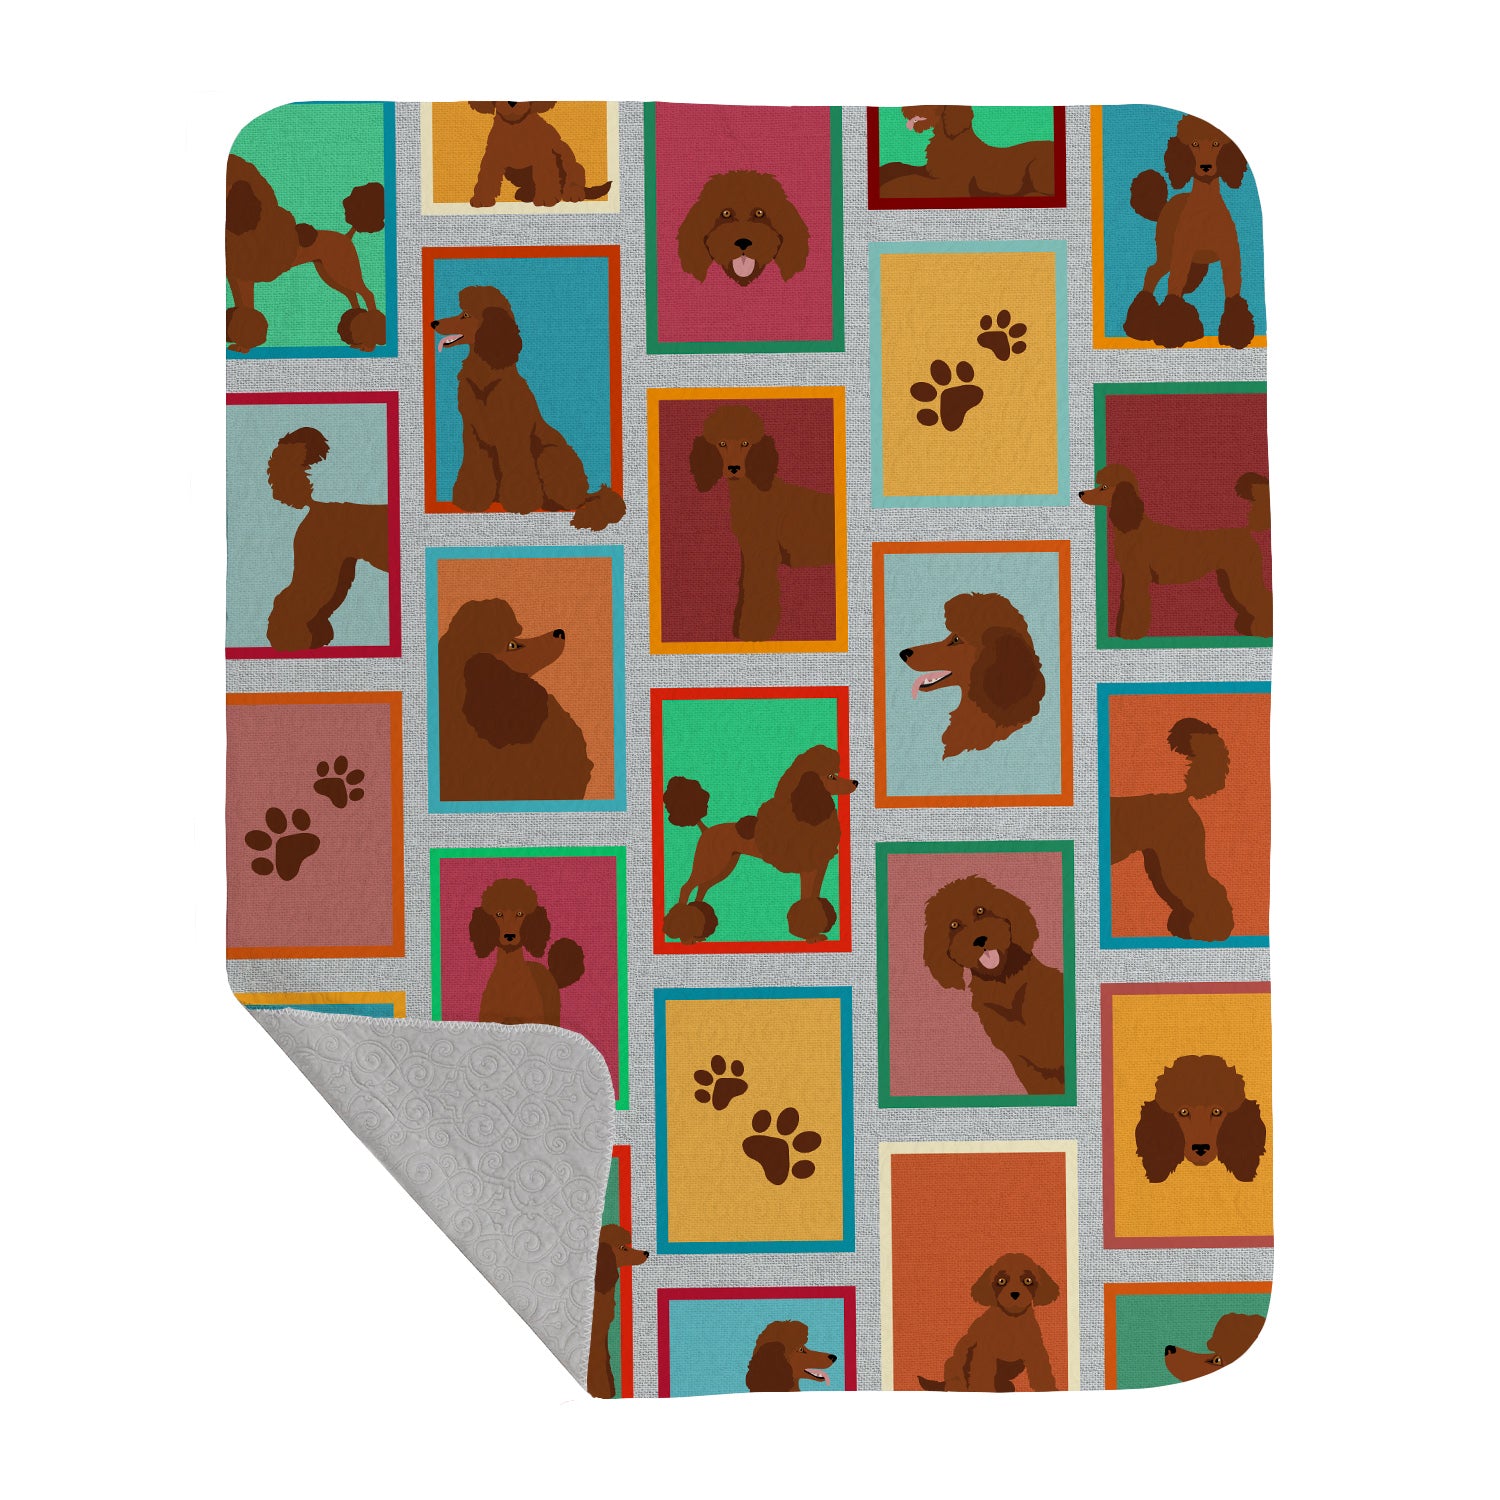 Buy this Lots of Chocolate Standard Poodle Quilted Blanket 50x60